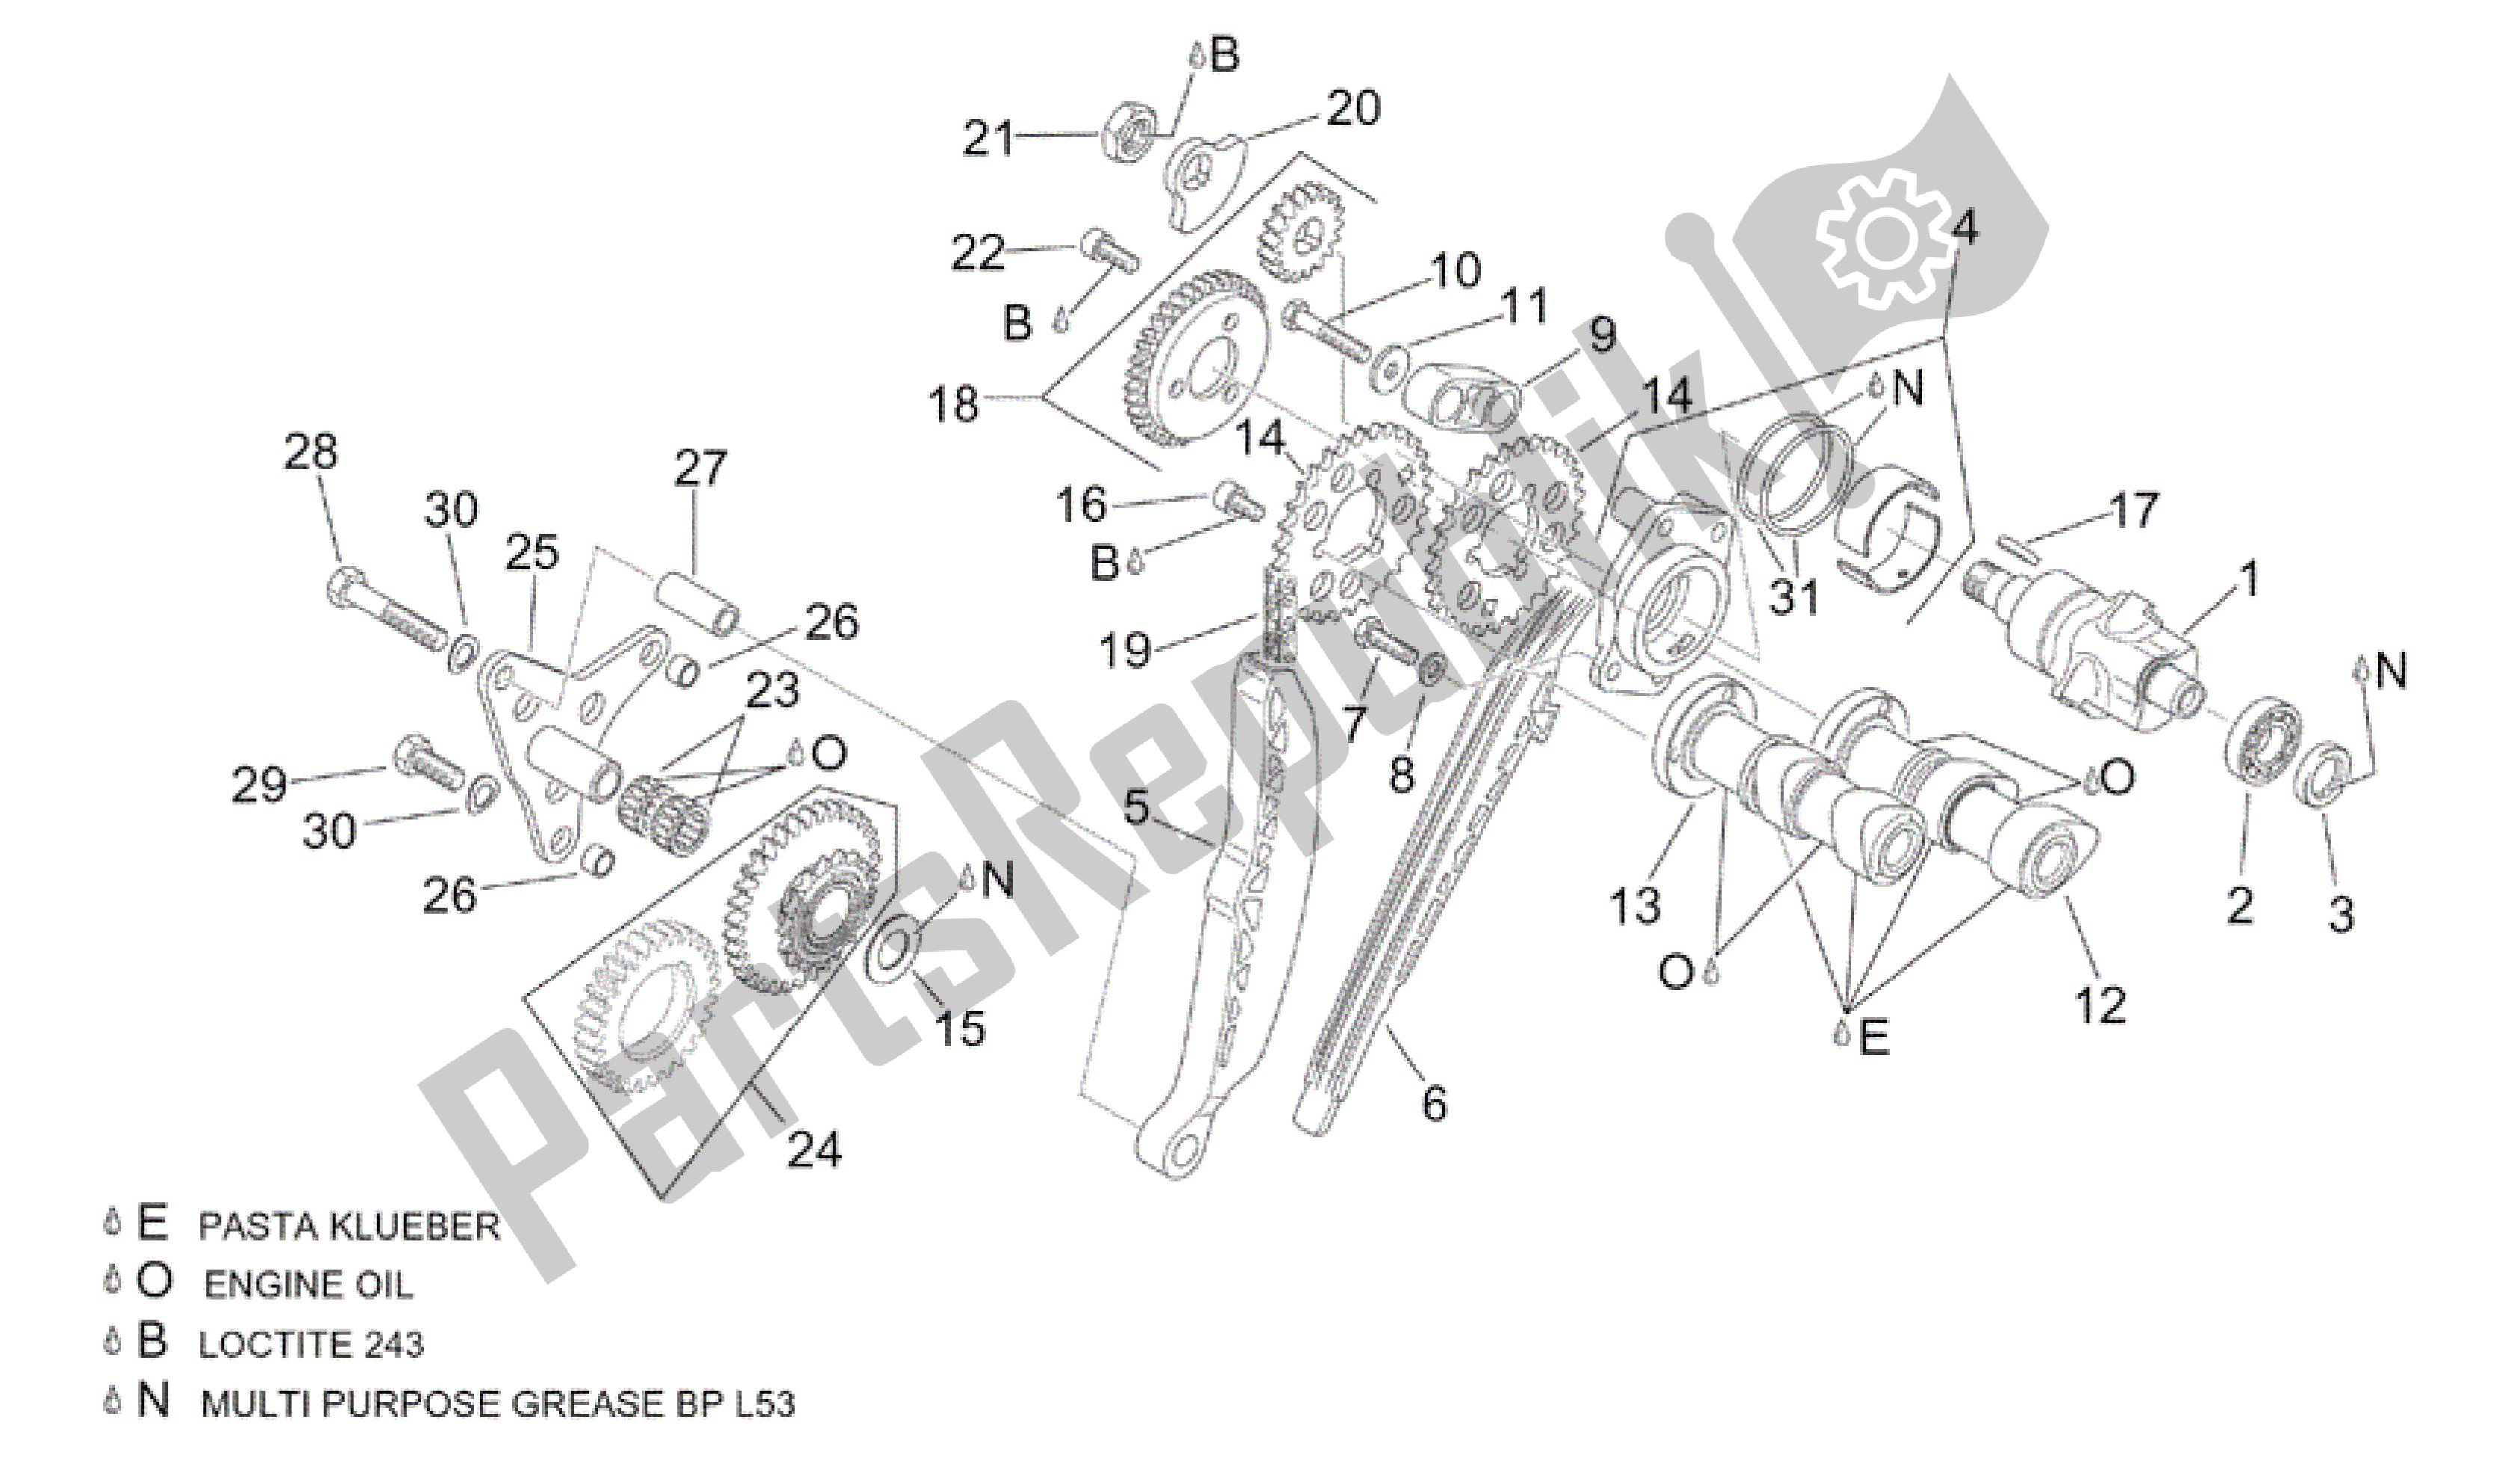 All parts for the Rear Cylinder Timing System of the Aprilia RSV Tuono R Factory 1000 2004 - 2005